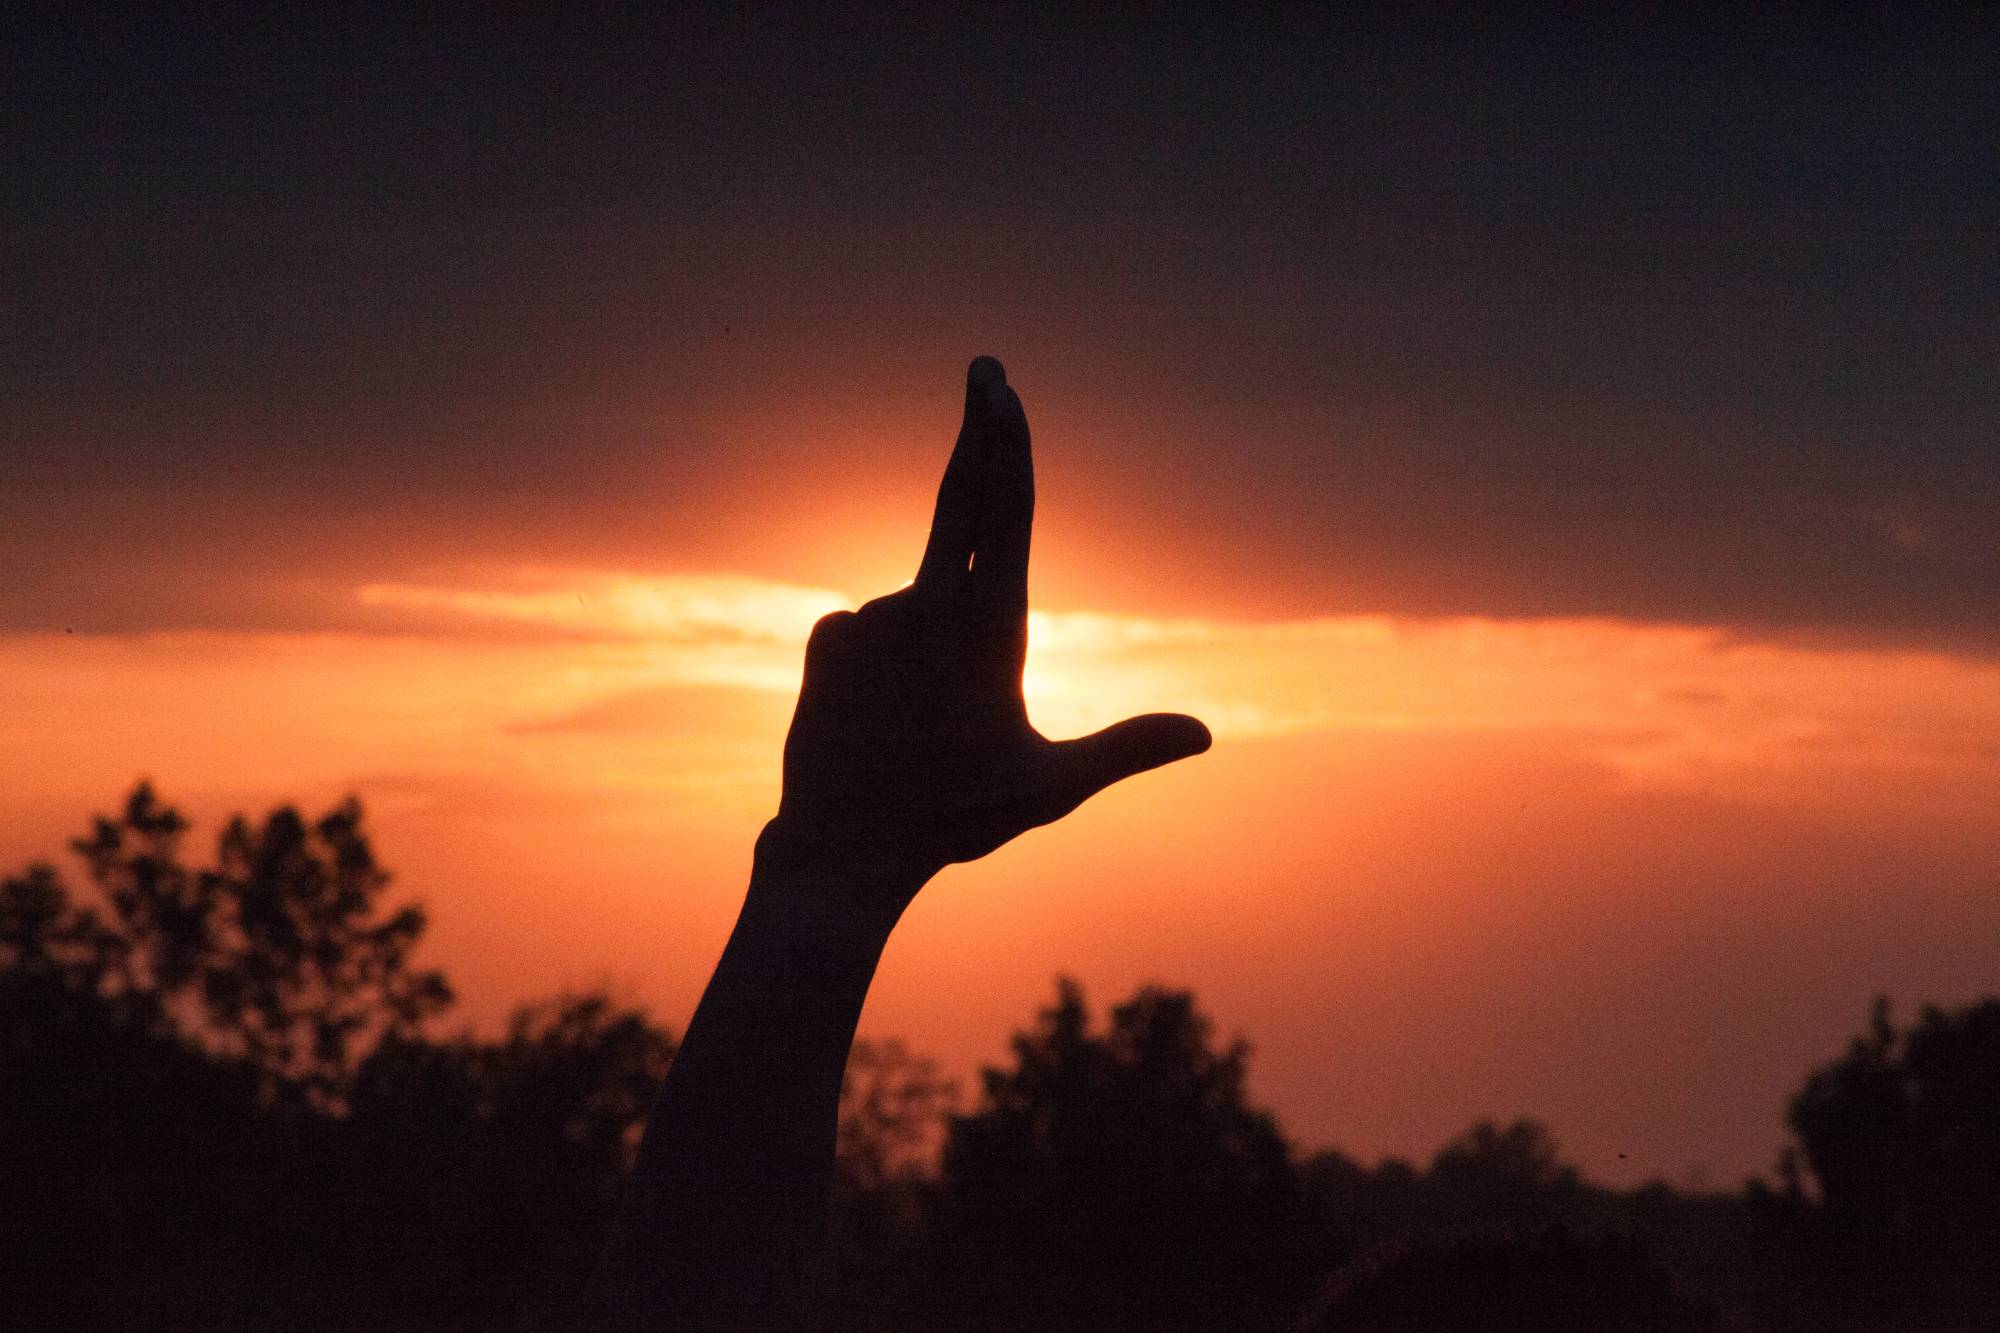 A hand in the shape of an L against a sunset.